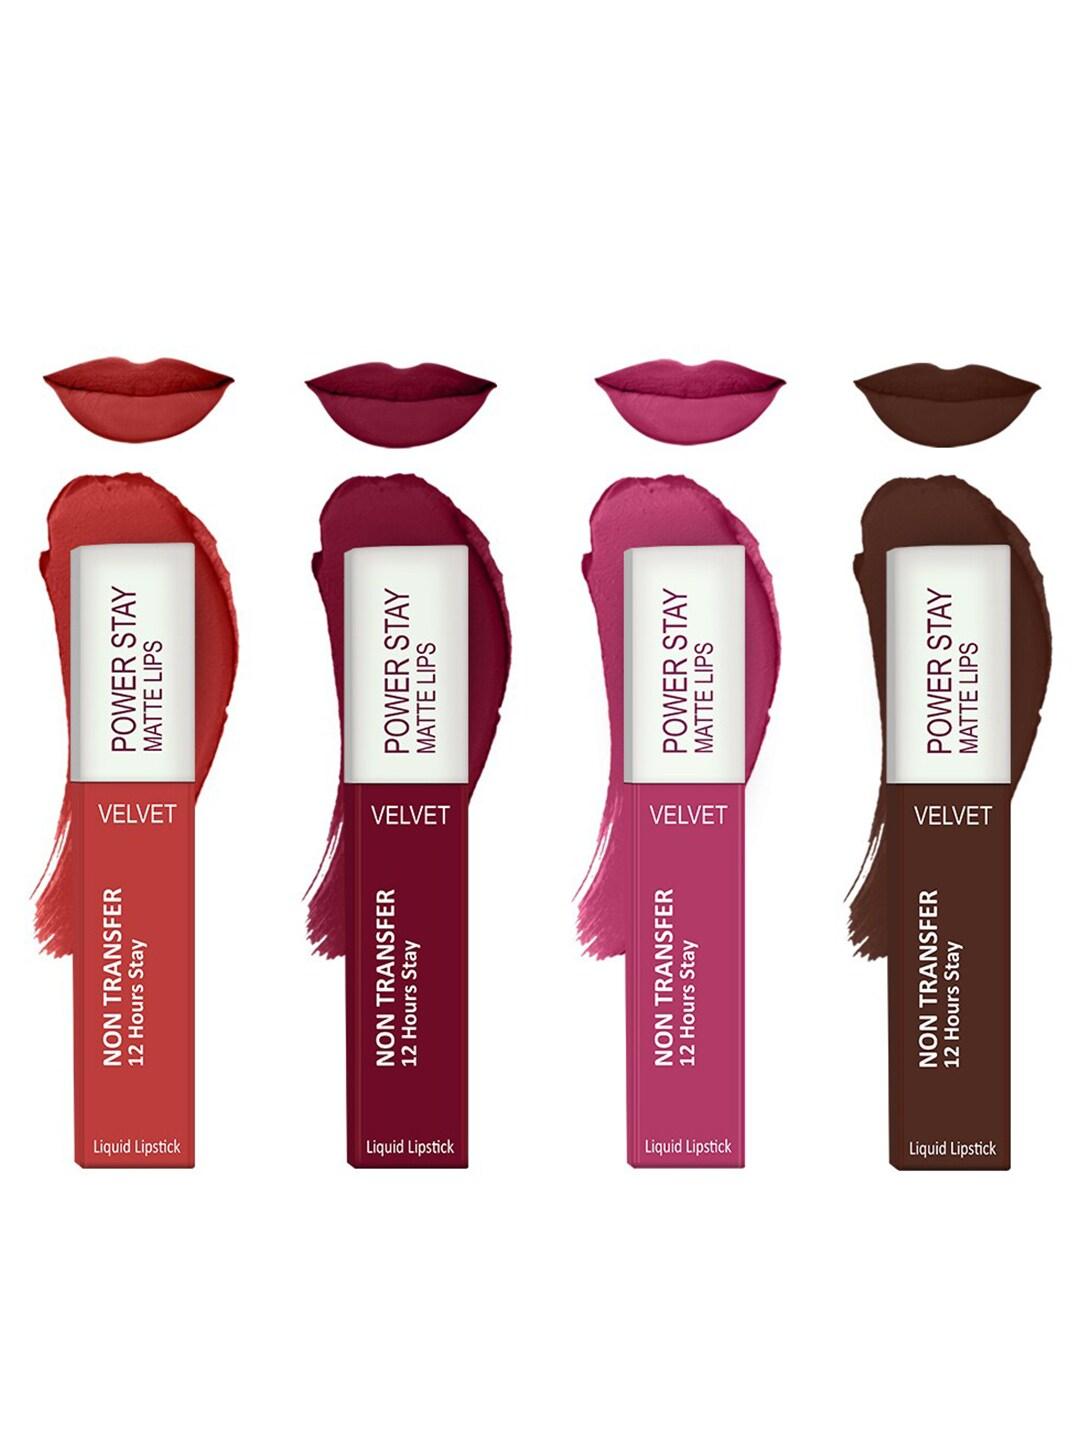 Forsure Set of 4 Power Stay Matte Lips Non-Transfer 12 Hours Stay Velvet Matte Liquid Lipstick - Bright Red 01 - Cherry Maroon 09 - Pink Blush 10 - Deep Brown 16